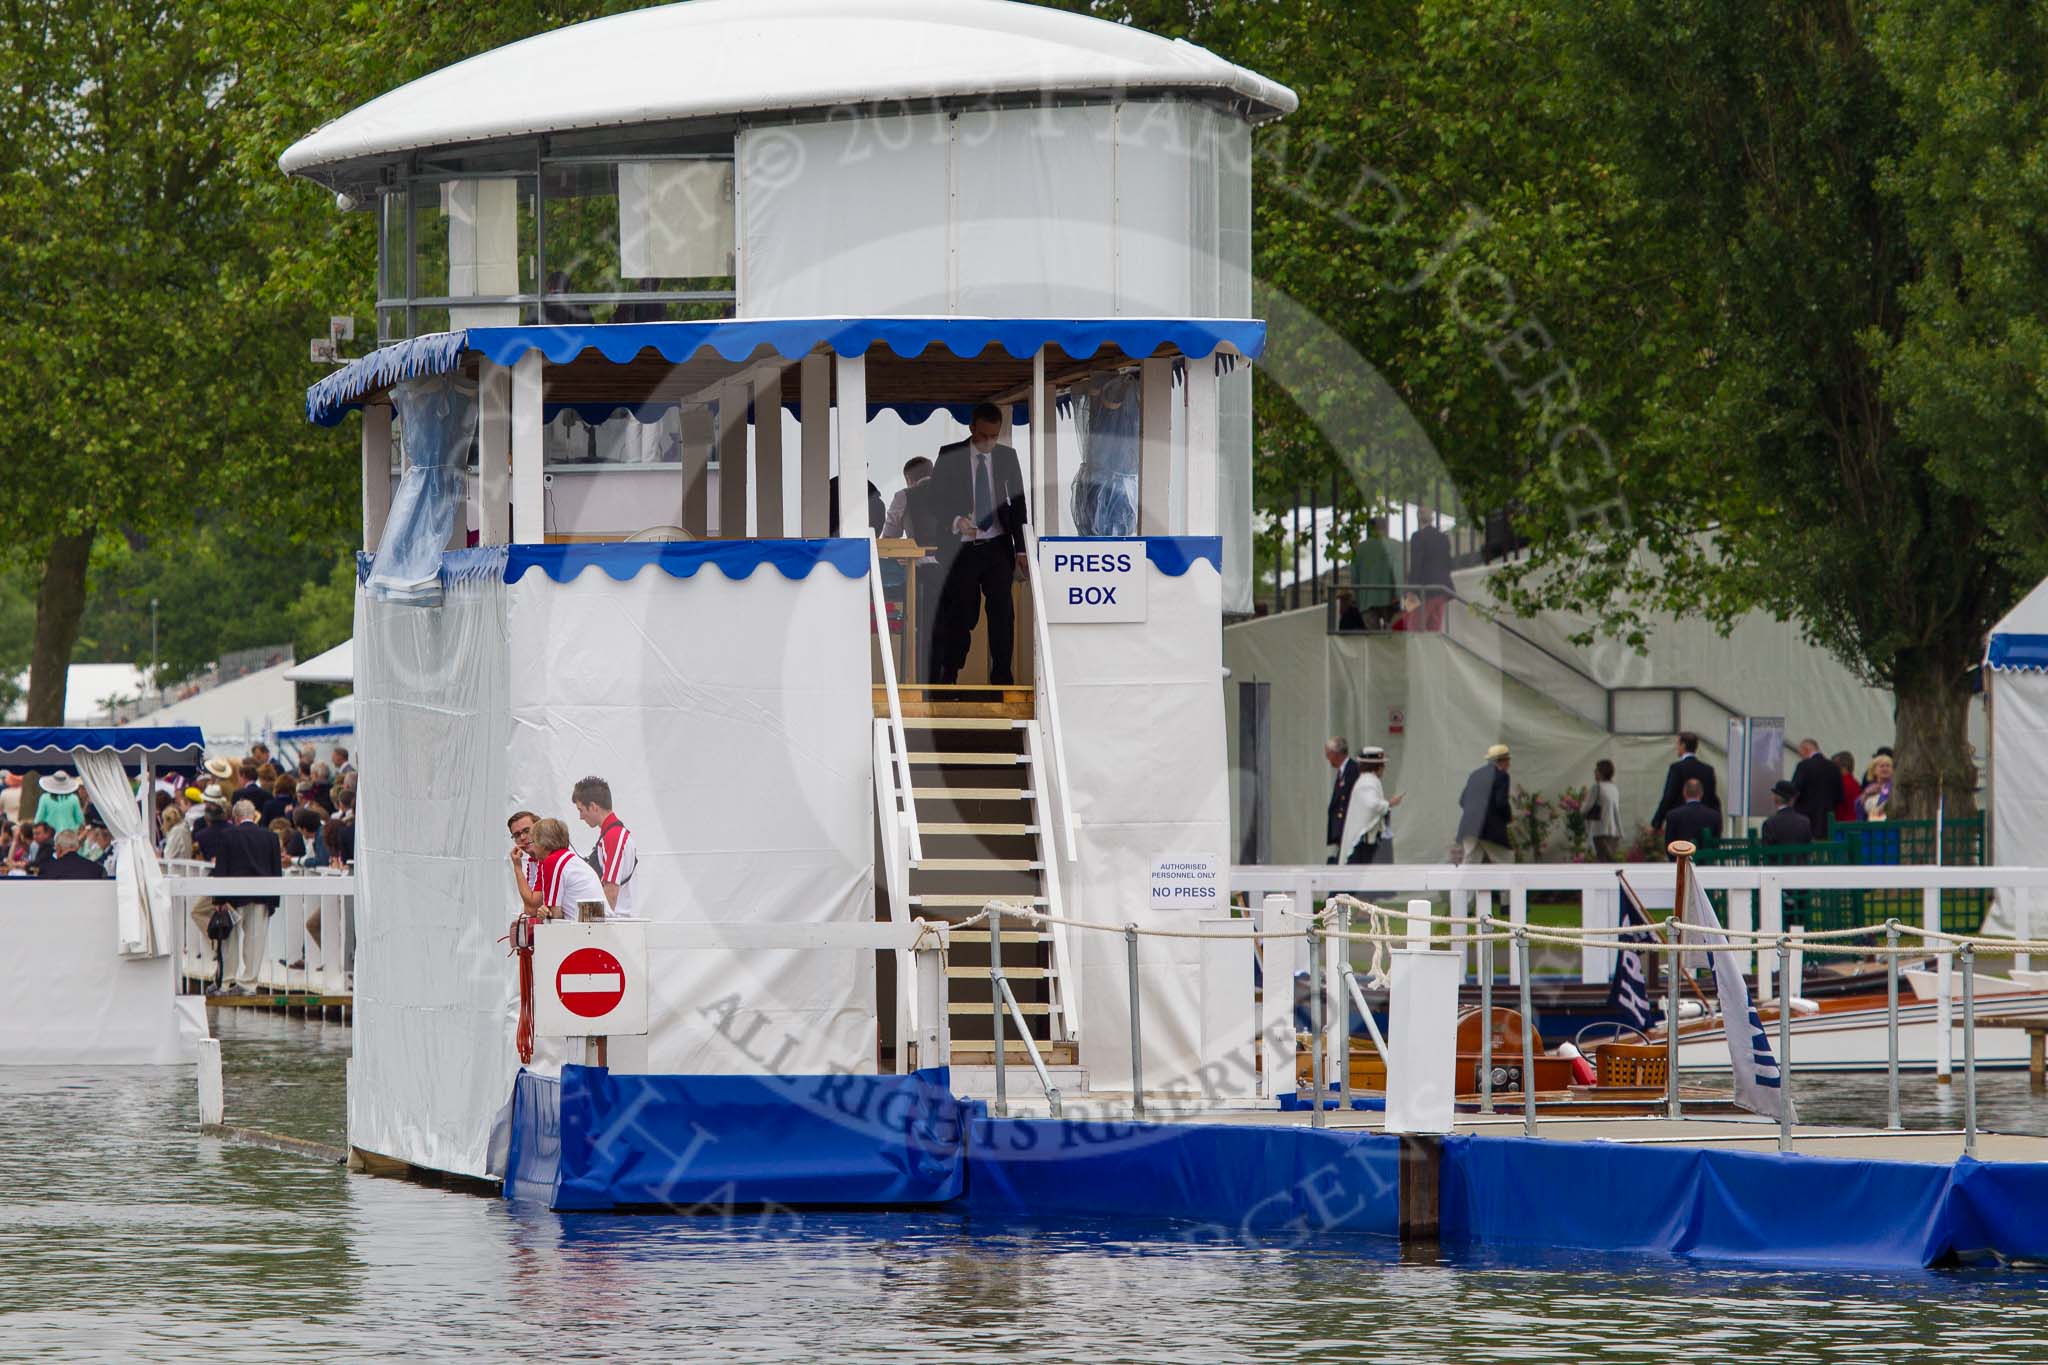 Henley Royal Regatta 2013 (Wednesday): The Press Box of the Henley Royal Regatta, behind the Stewards' Enclosure..
River Thames between Henley and Temple Island,
Henley-on-Thames,
Berkshire,
United Kingdom,
on 03 July 2013 at 09:36, image #12